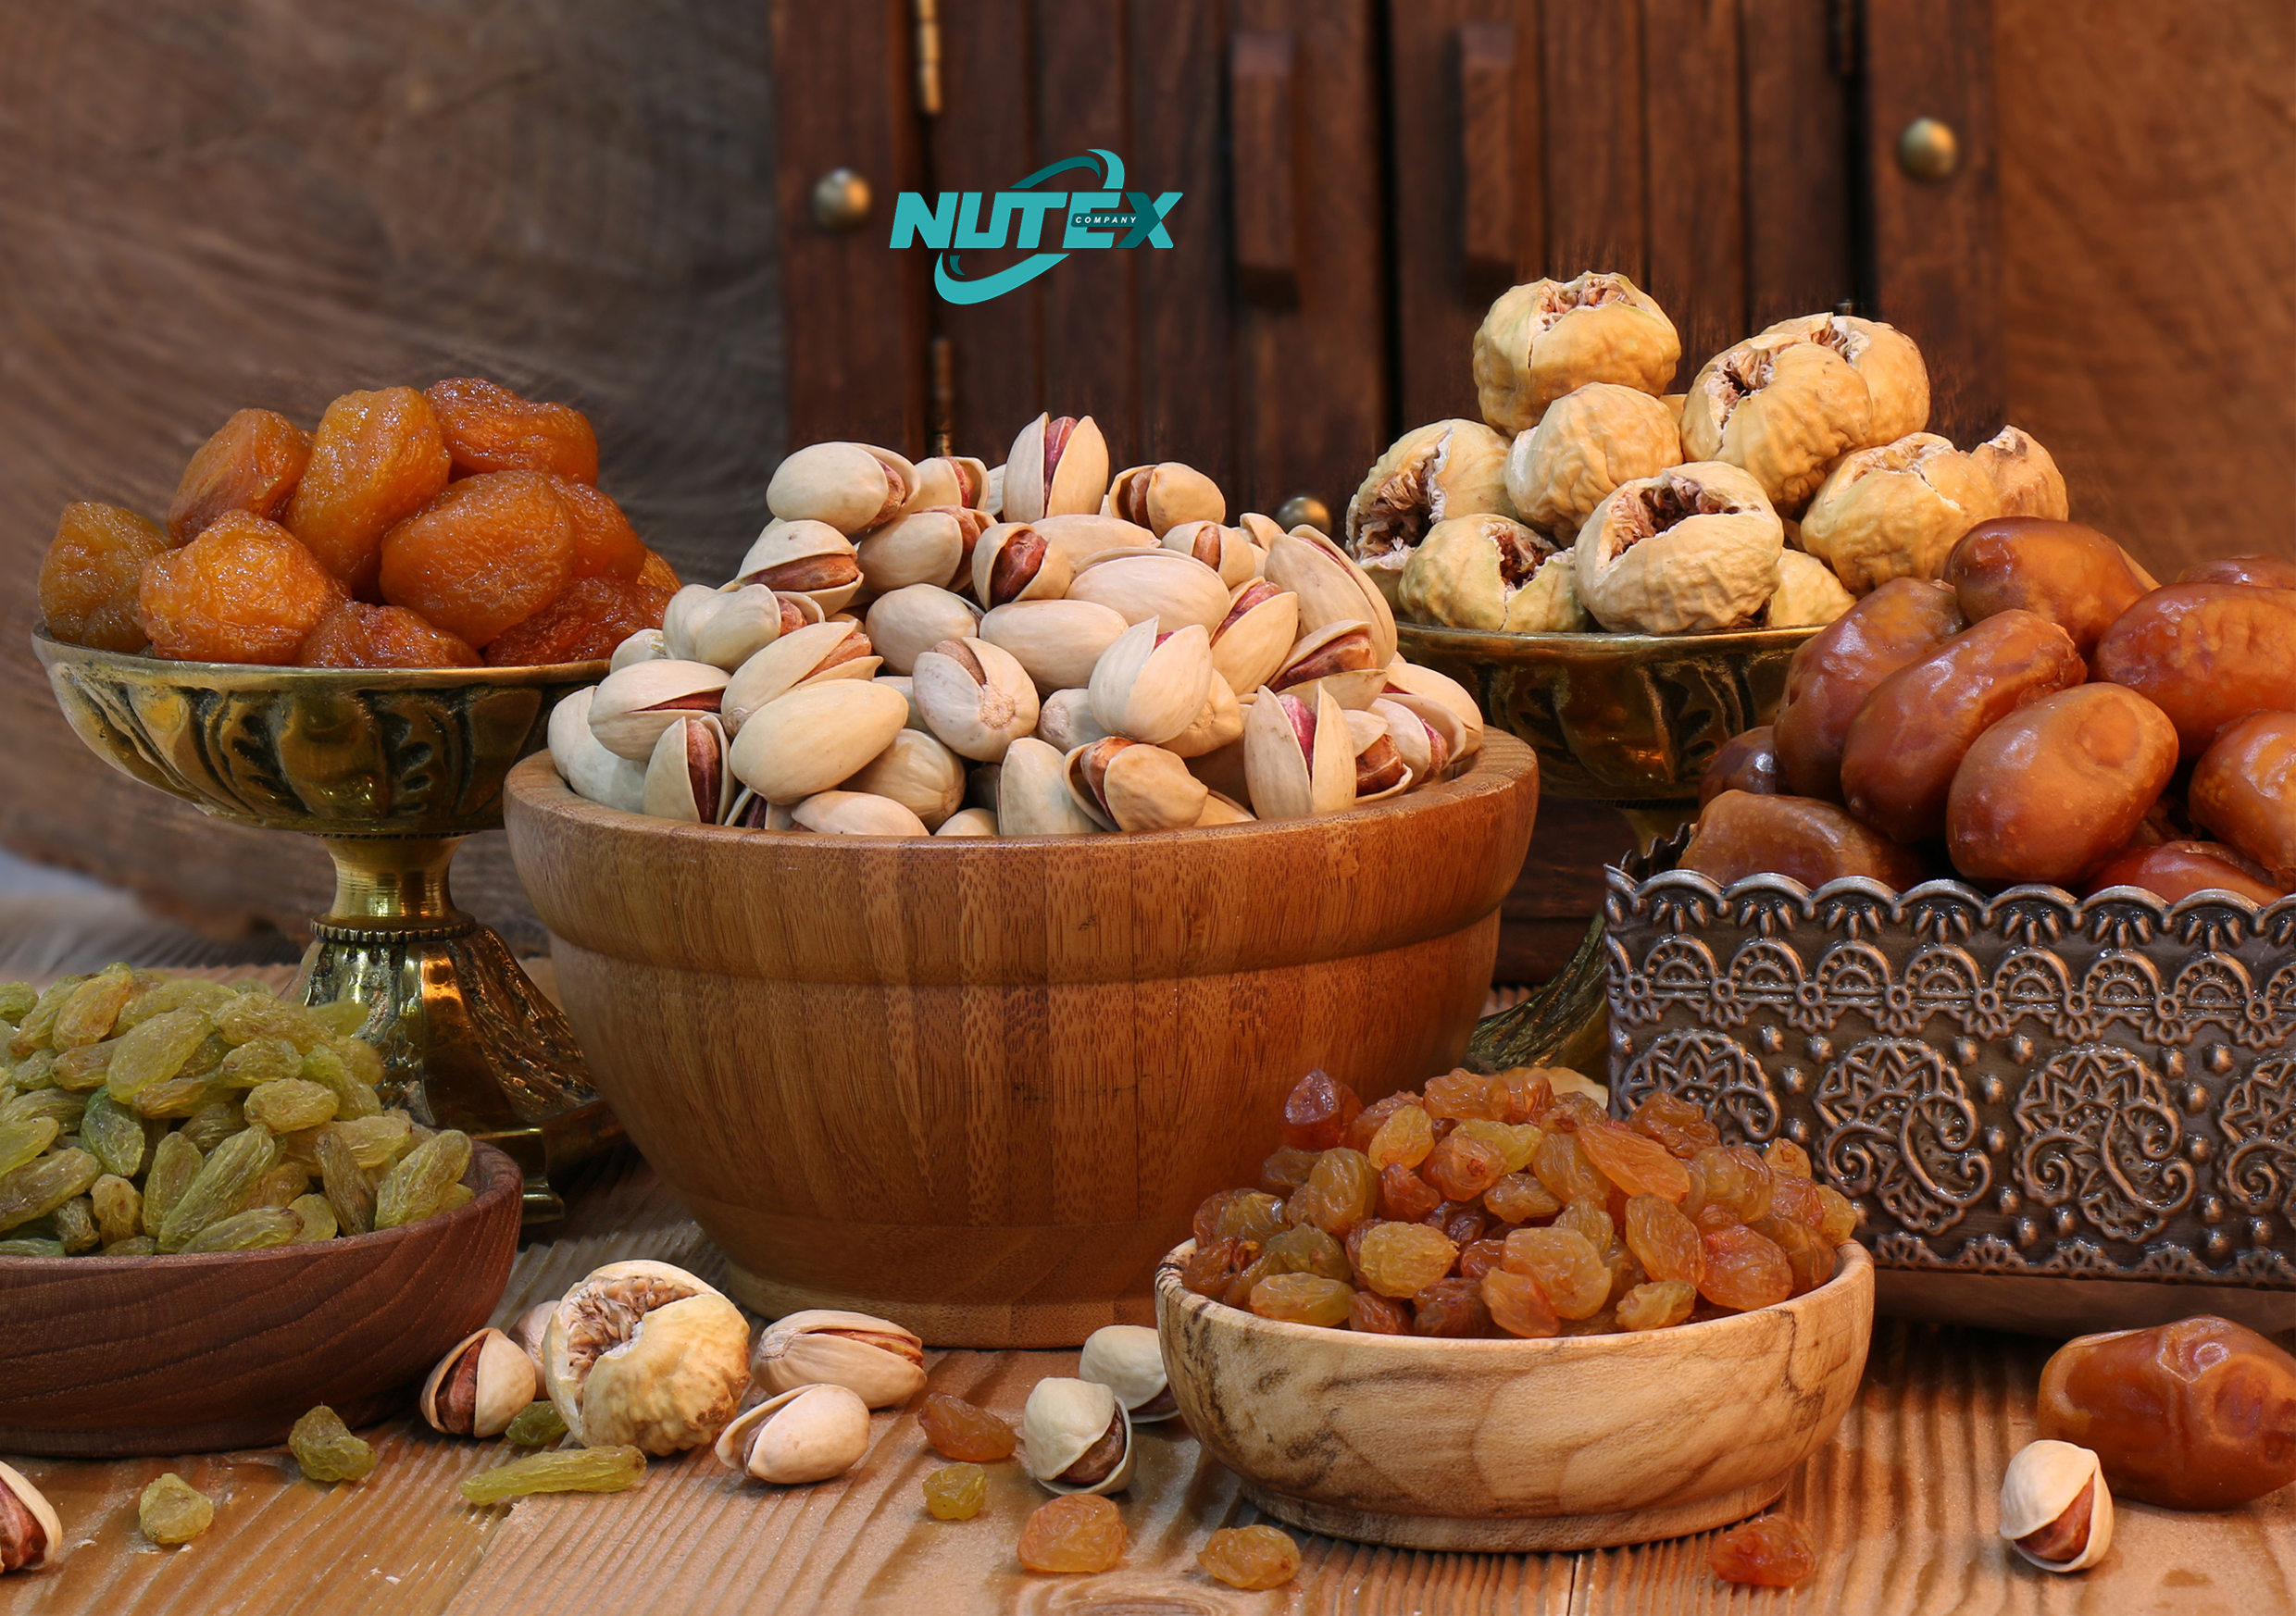 Our dried fruit services - Dried fruits‚ Seeds‚ Nuts Wholesale in Nutex